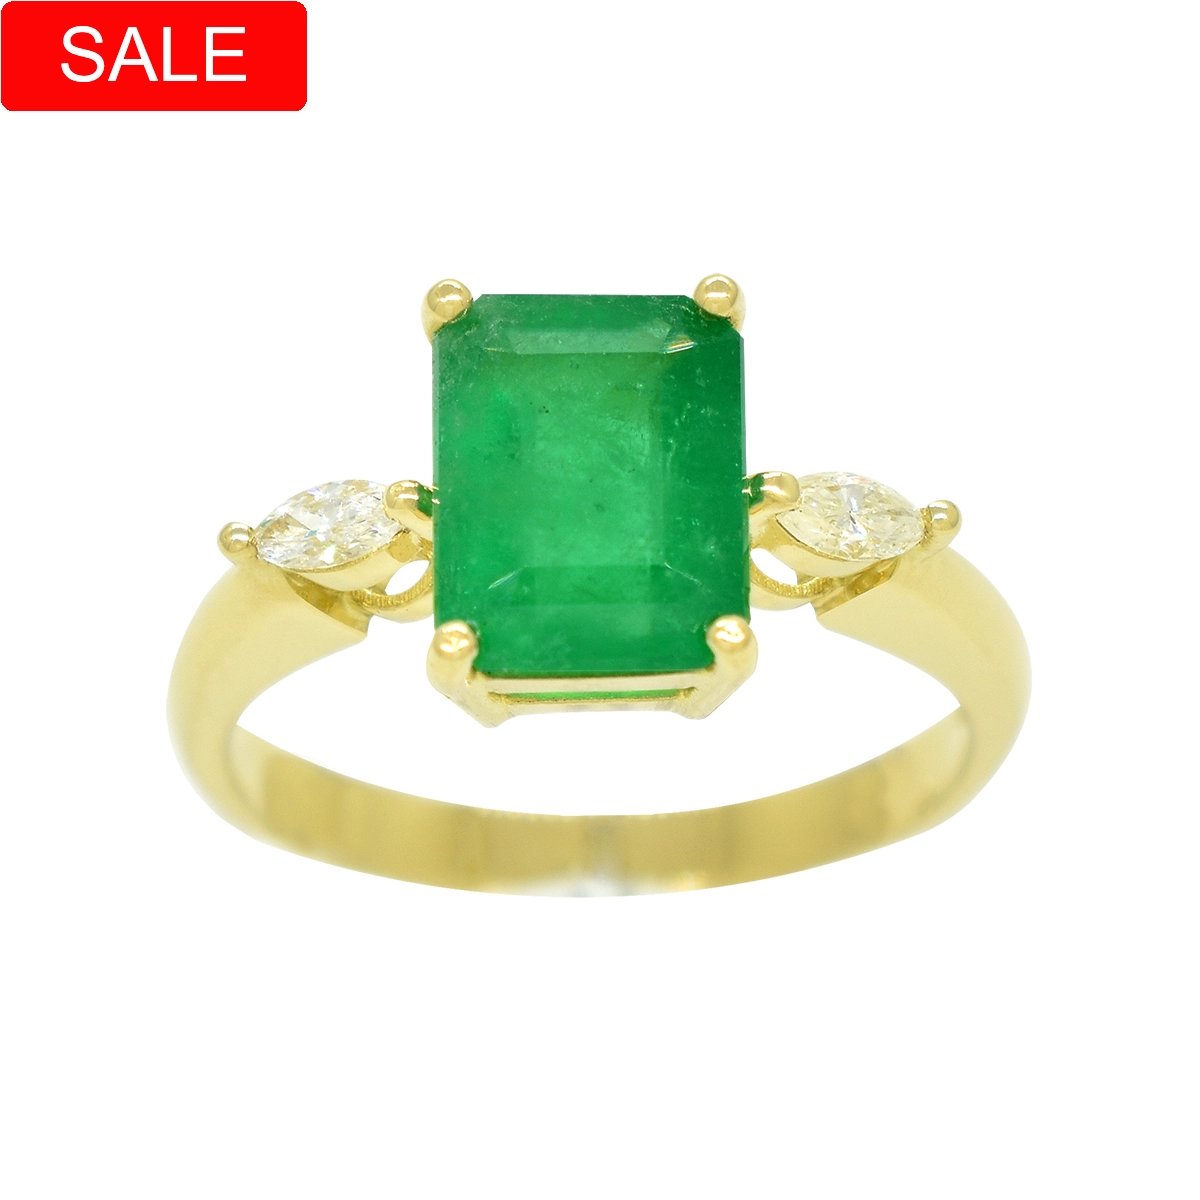 3-stones ring with emerald-cut natural emerald and 2 marquise shape diamonds in solid 18K gold